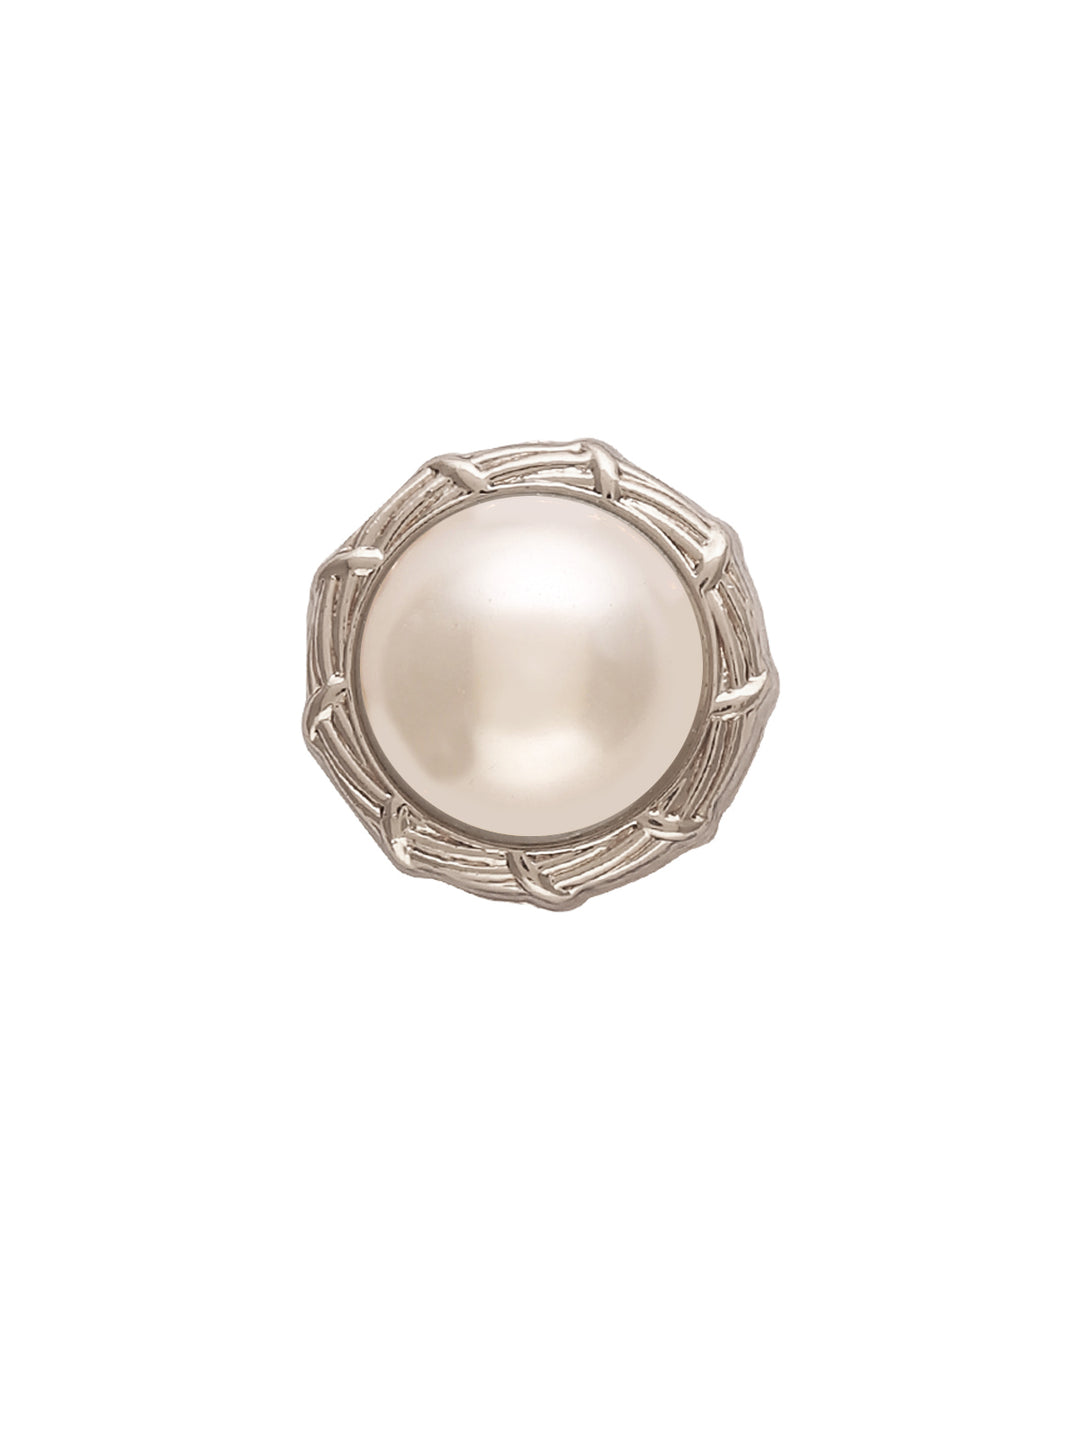 Super Classy Round Shape Shiny Silver Colour Pearl Buttons